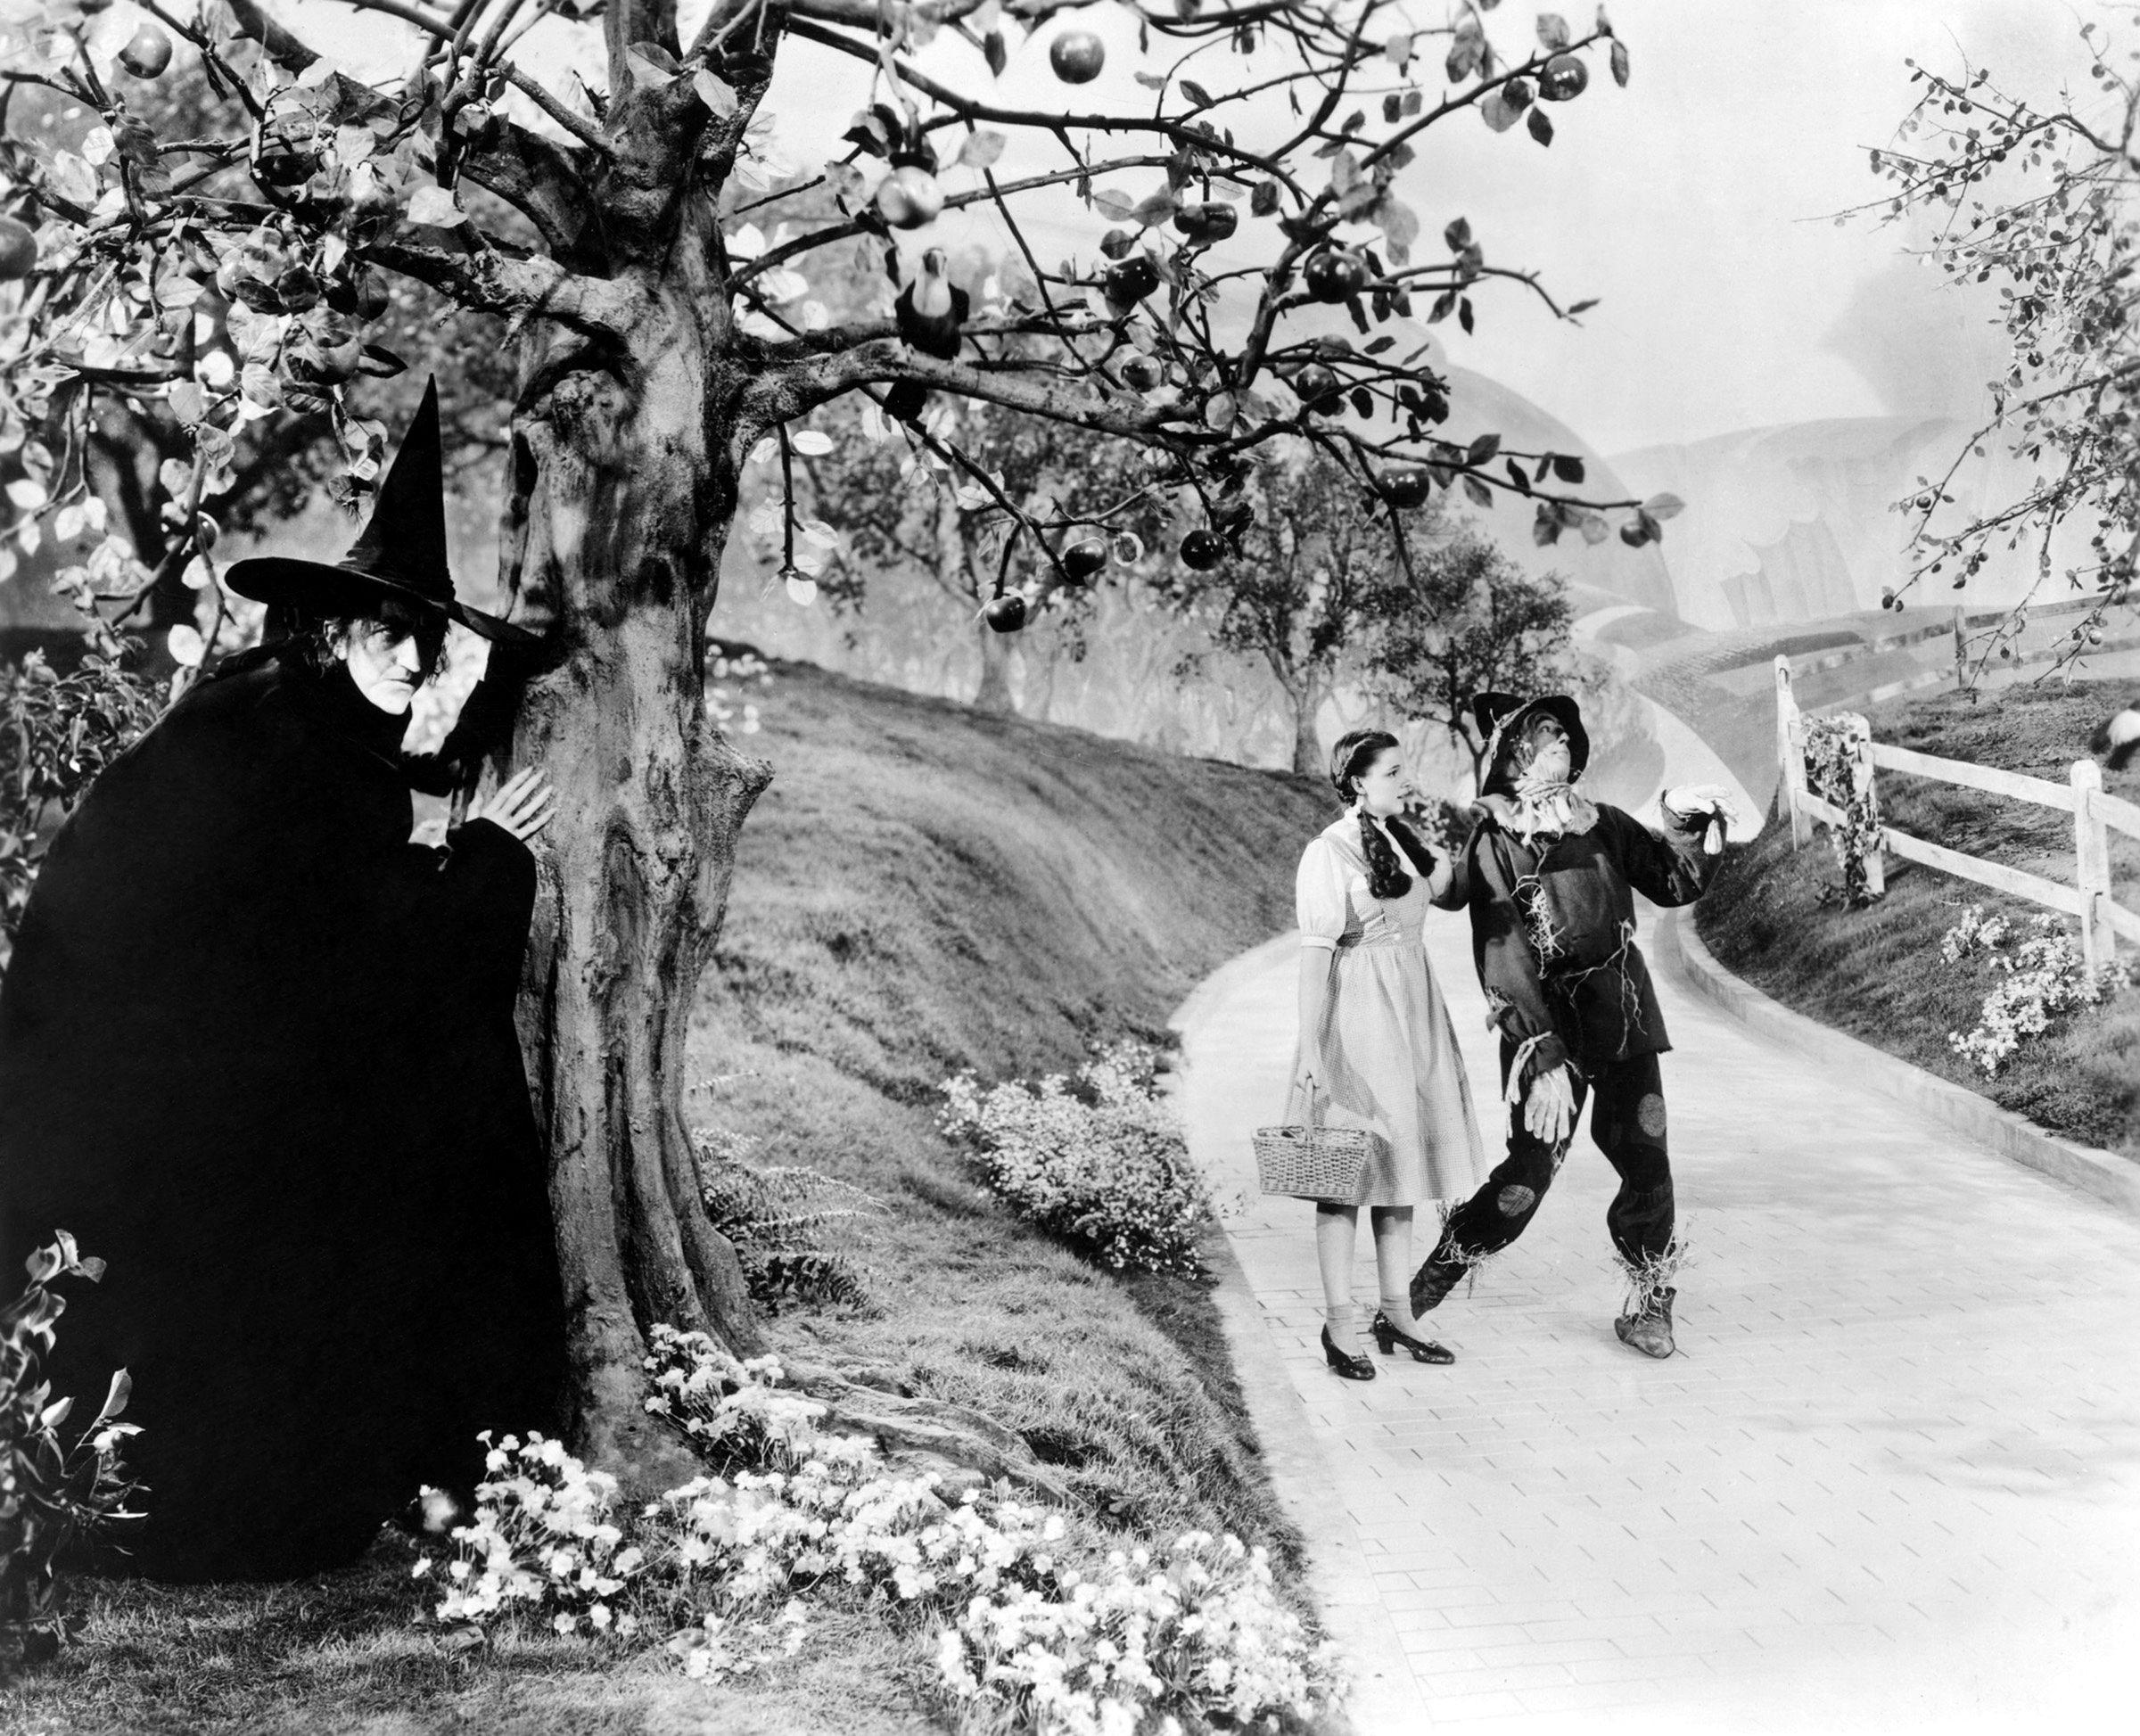 scarecrow wizard of oz grayscale judy garland witches